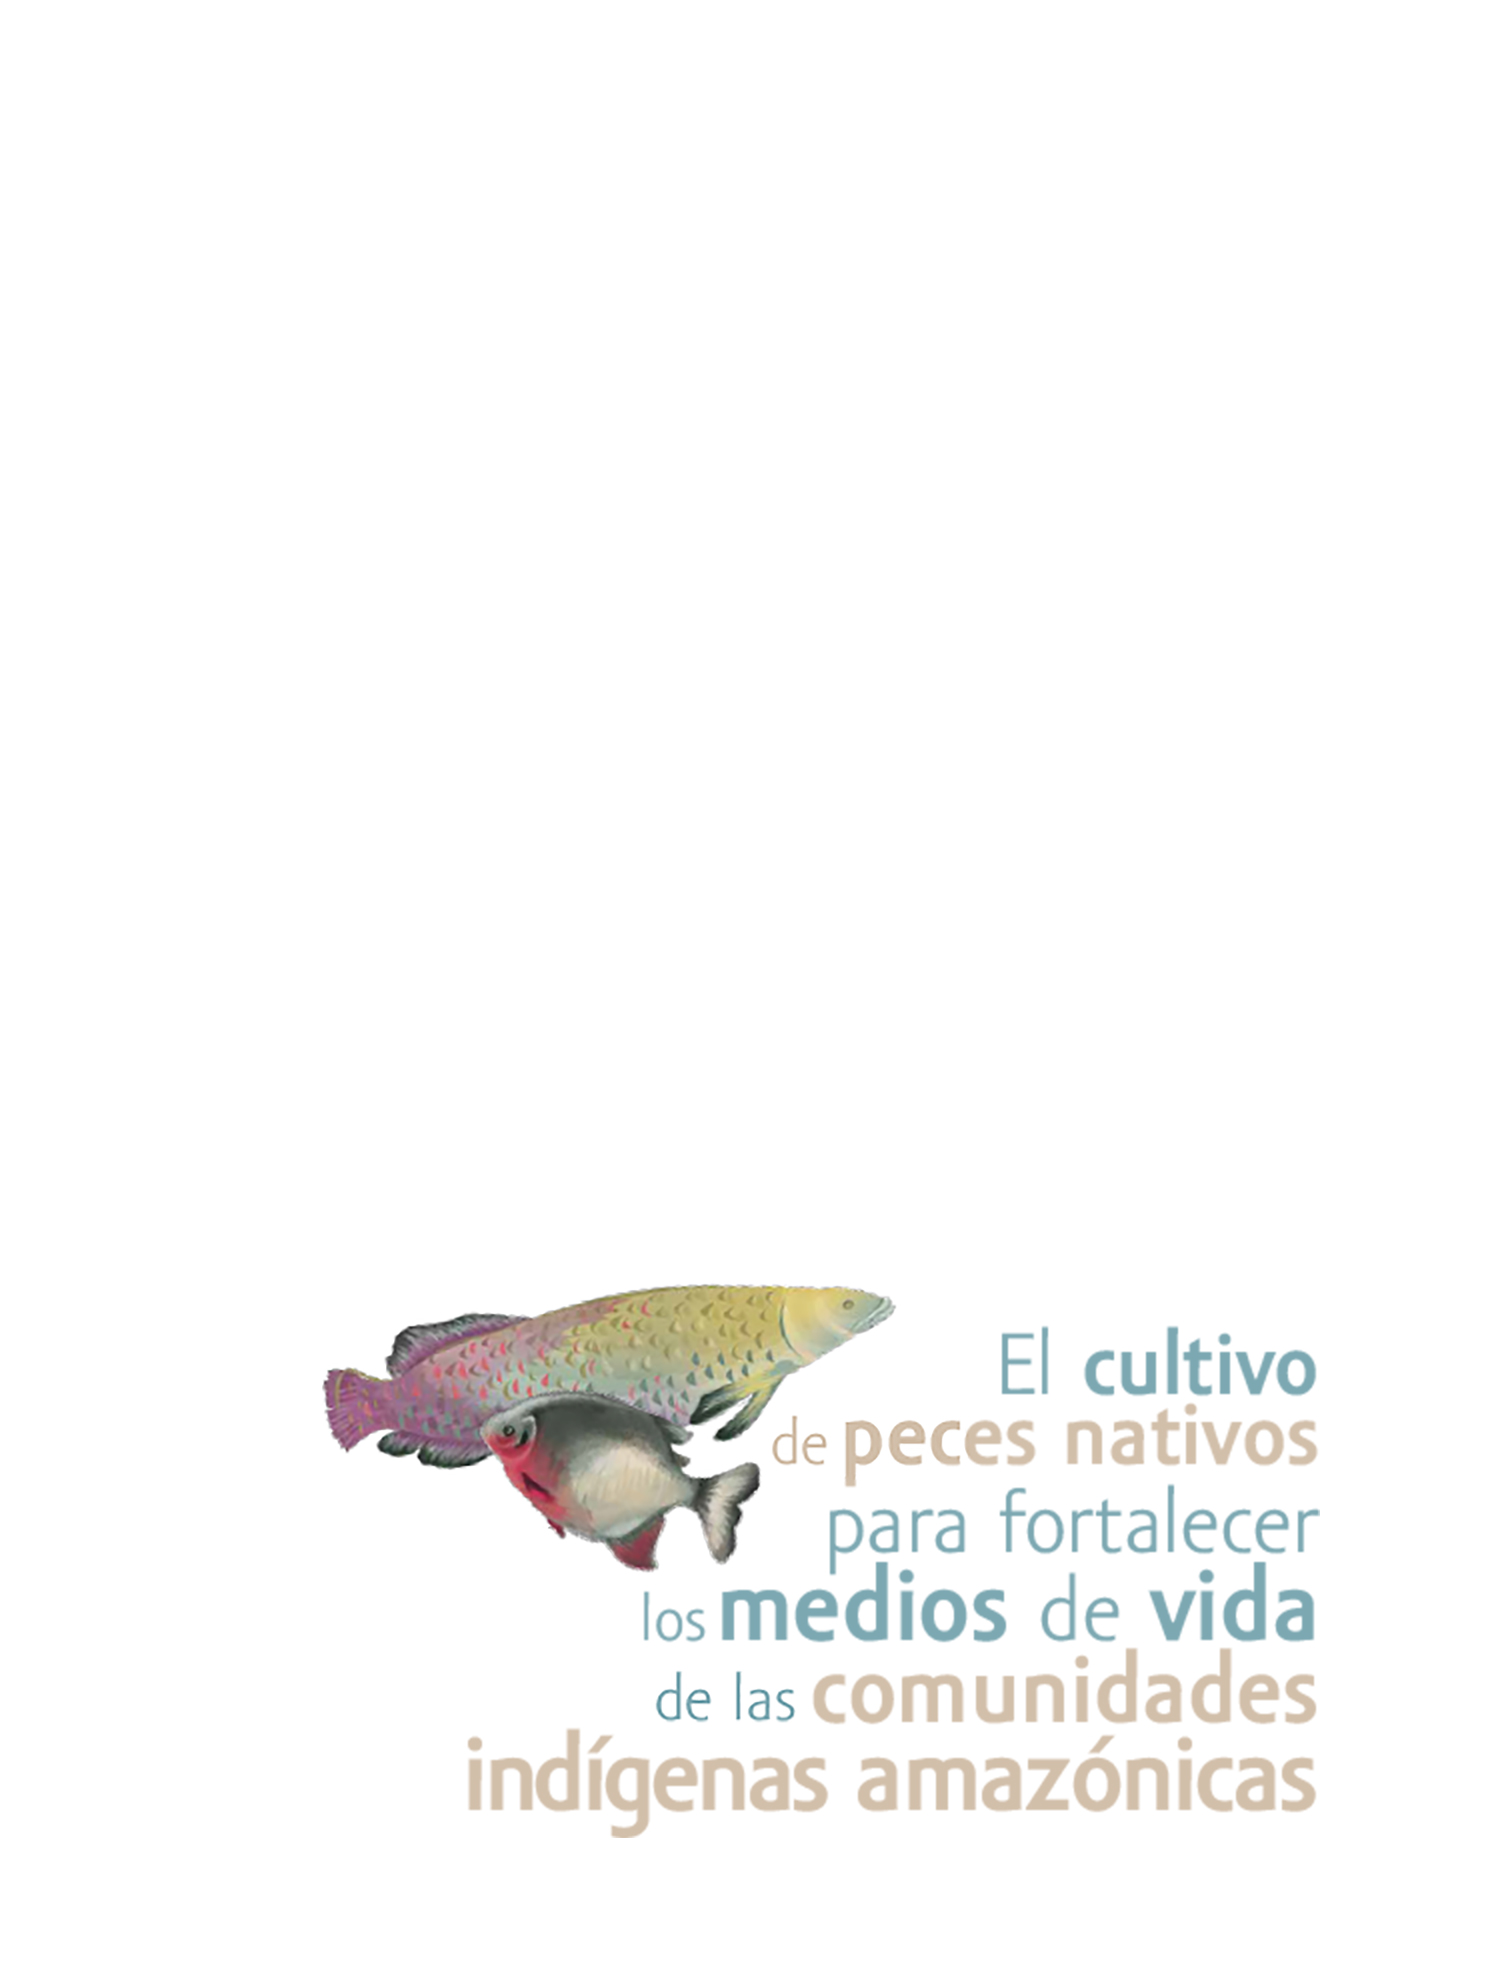 Book cover with fish 